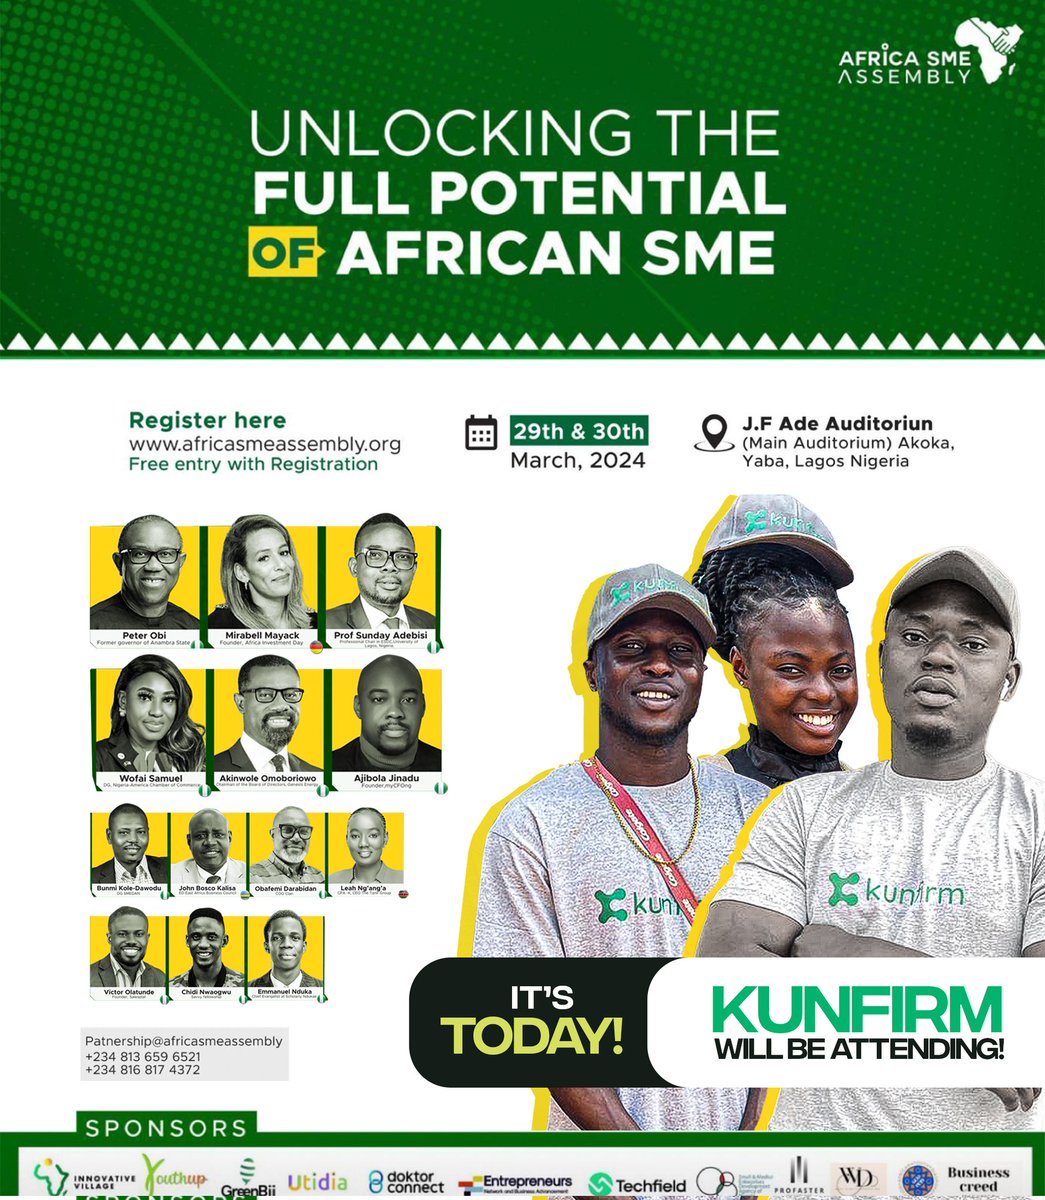 It's happening today! 🤩 Join us at #UnlockingTheFullPotential Of African SMEs event in Akoka, Yaba, Lagos. Let's unlock the full potential of African SMEs together! See You There! #Empowerement #Entrepreneurs #SMEs